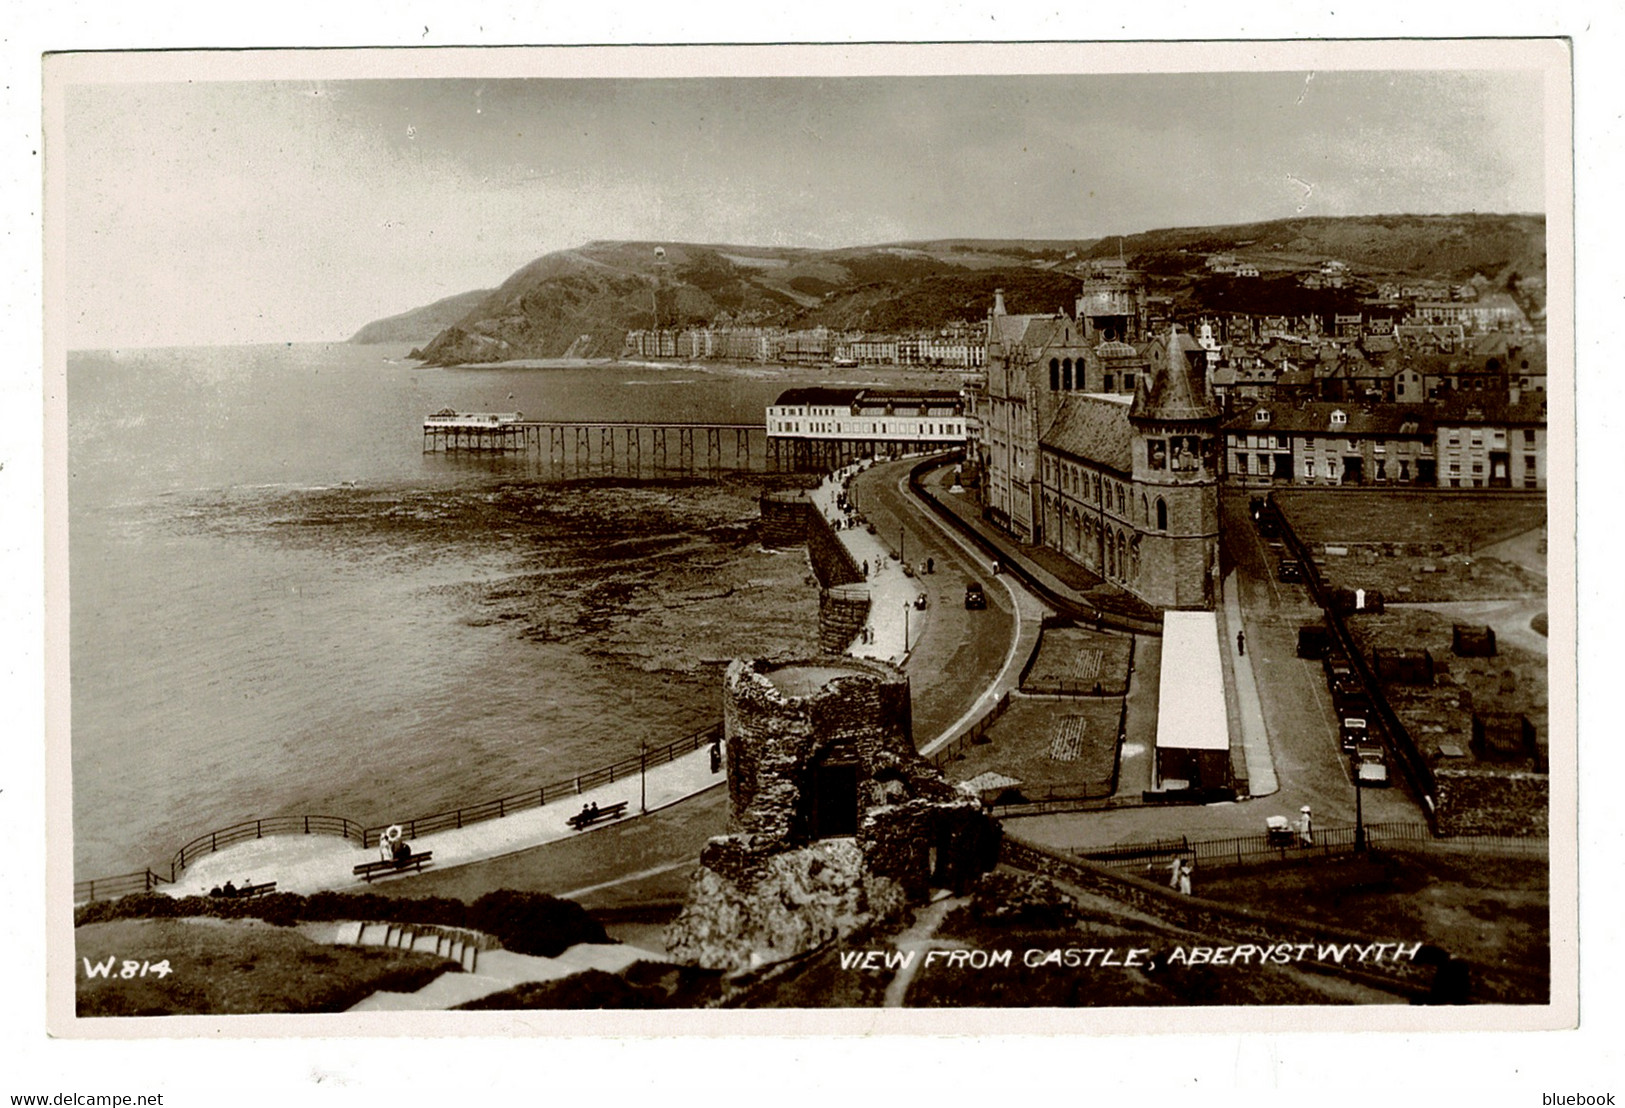 Ref 1418 - 1947 Real Photo Postcard - View From The Castle - Aberystwyth Pier Wales - Cardiganshire